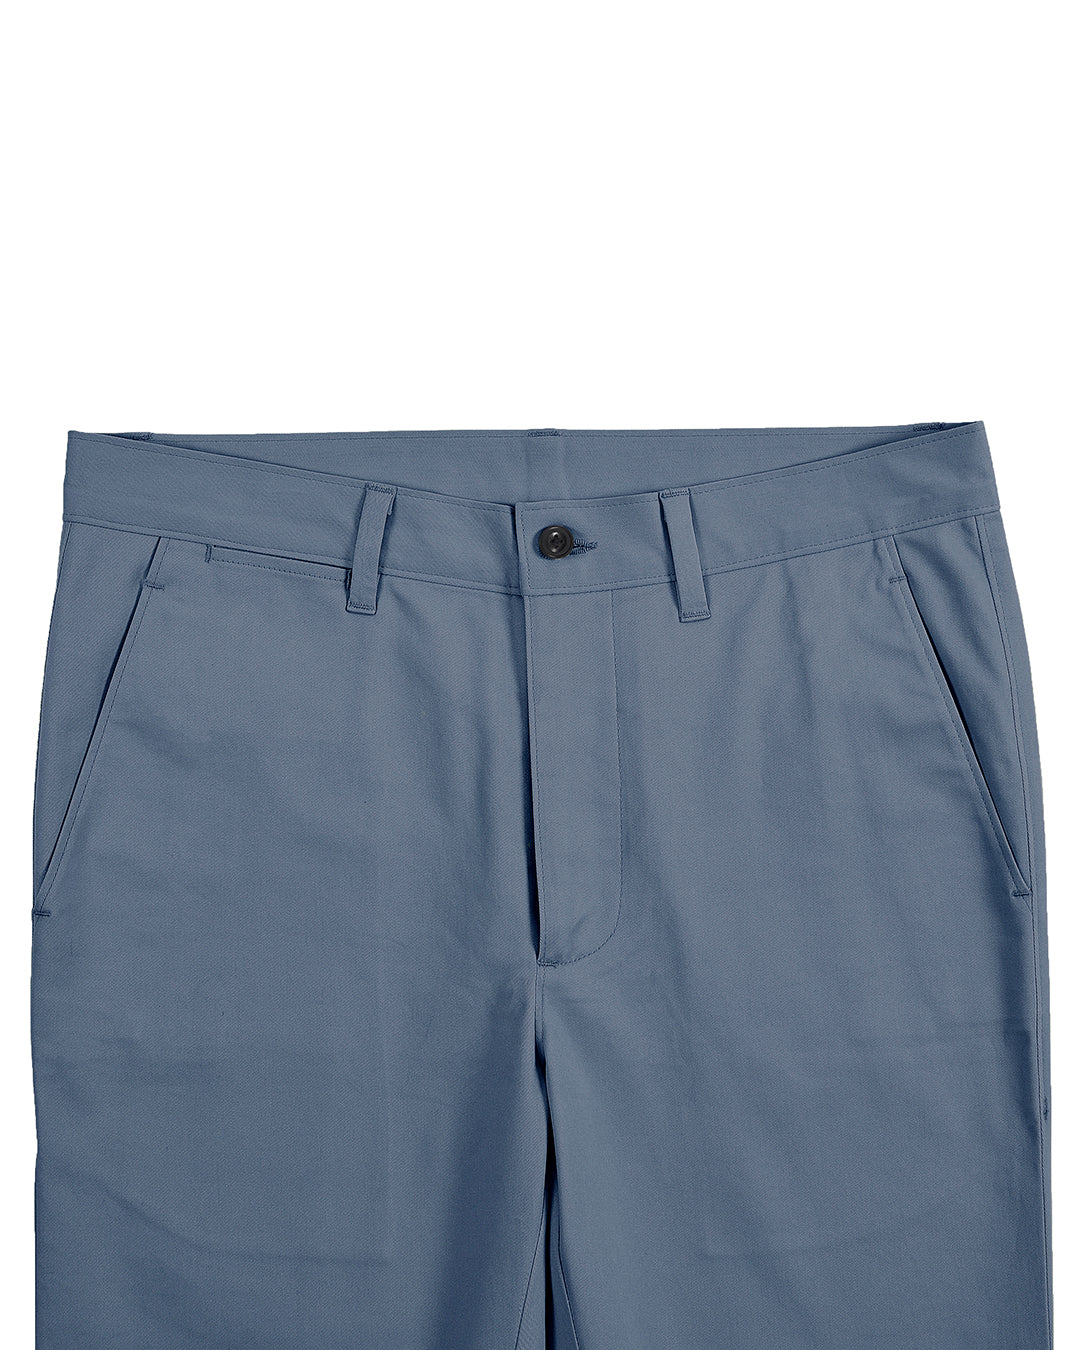 Front view of custom Genoa Chino pants for men by Luxire in blueish grey